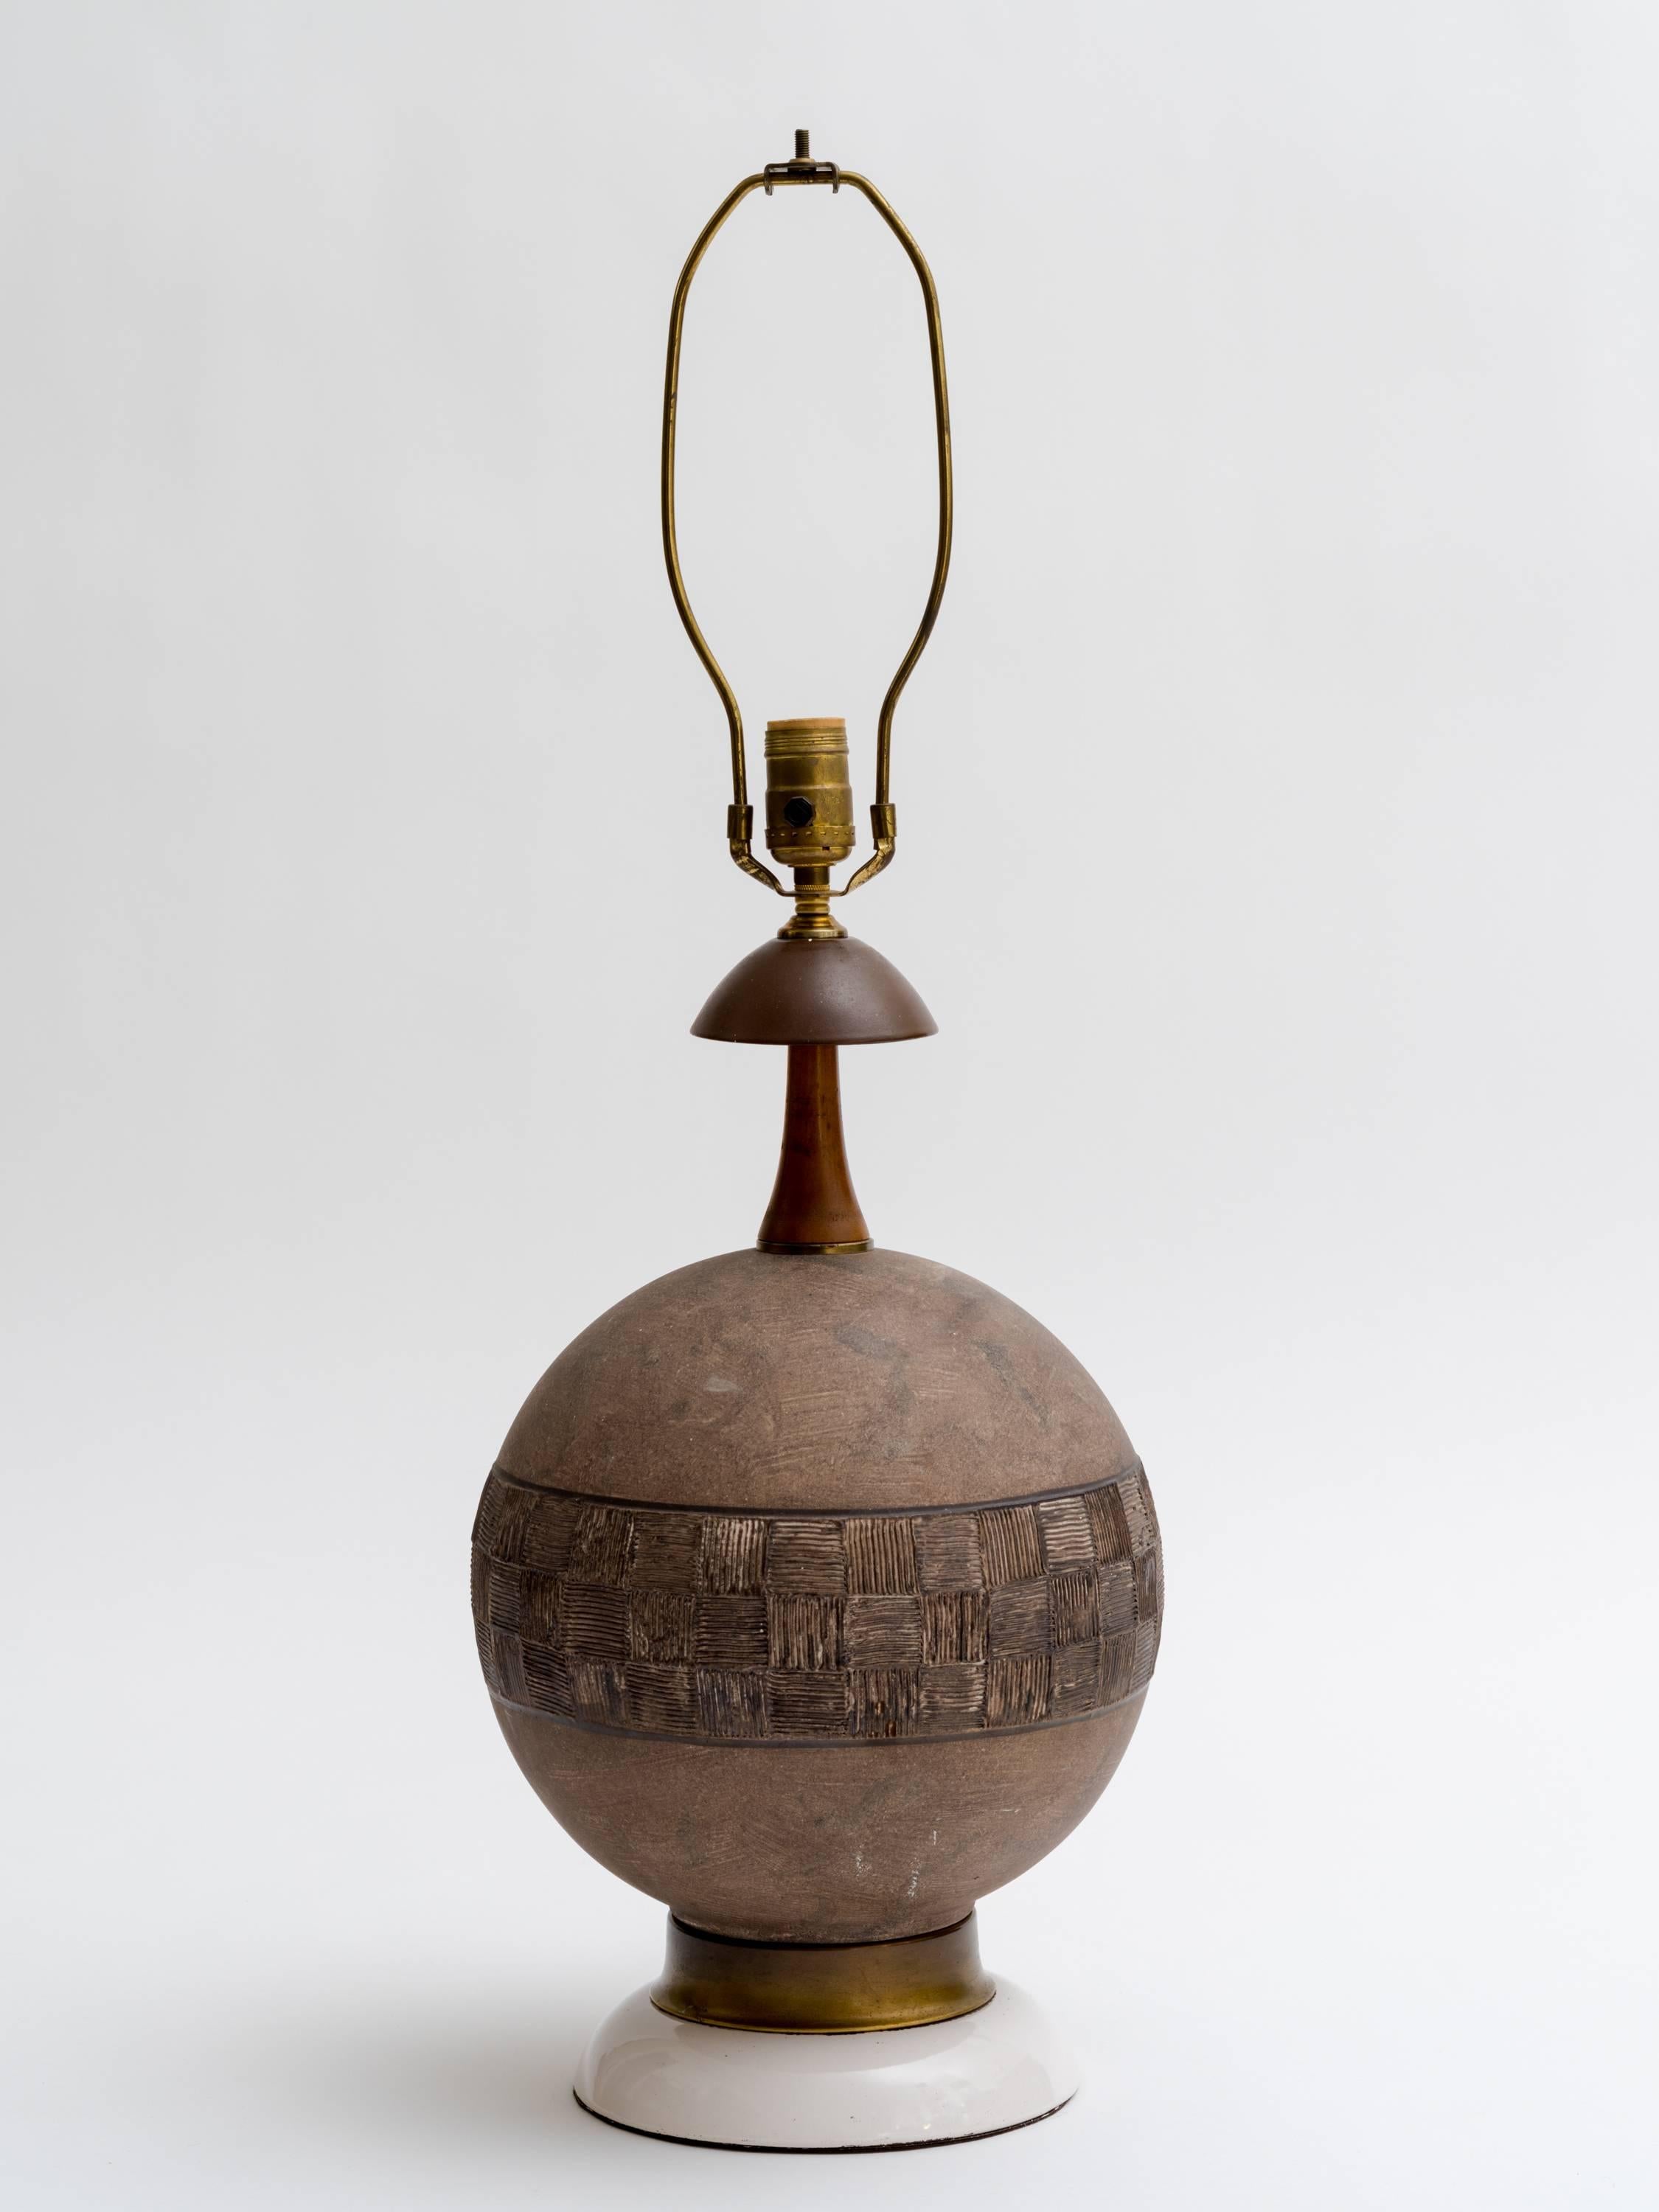 Large Italian hand crafted ceramic sphere lamp on brass and enamel base.
Raymor, Italy, circa 1950s.